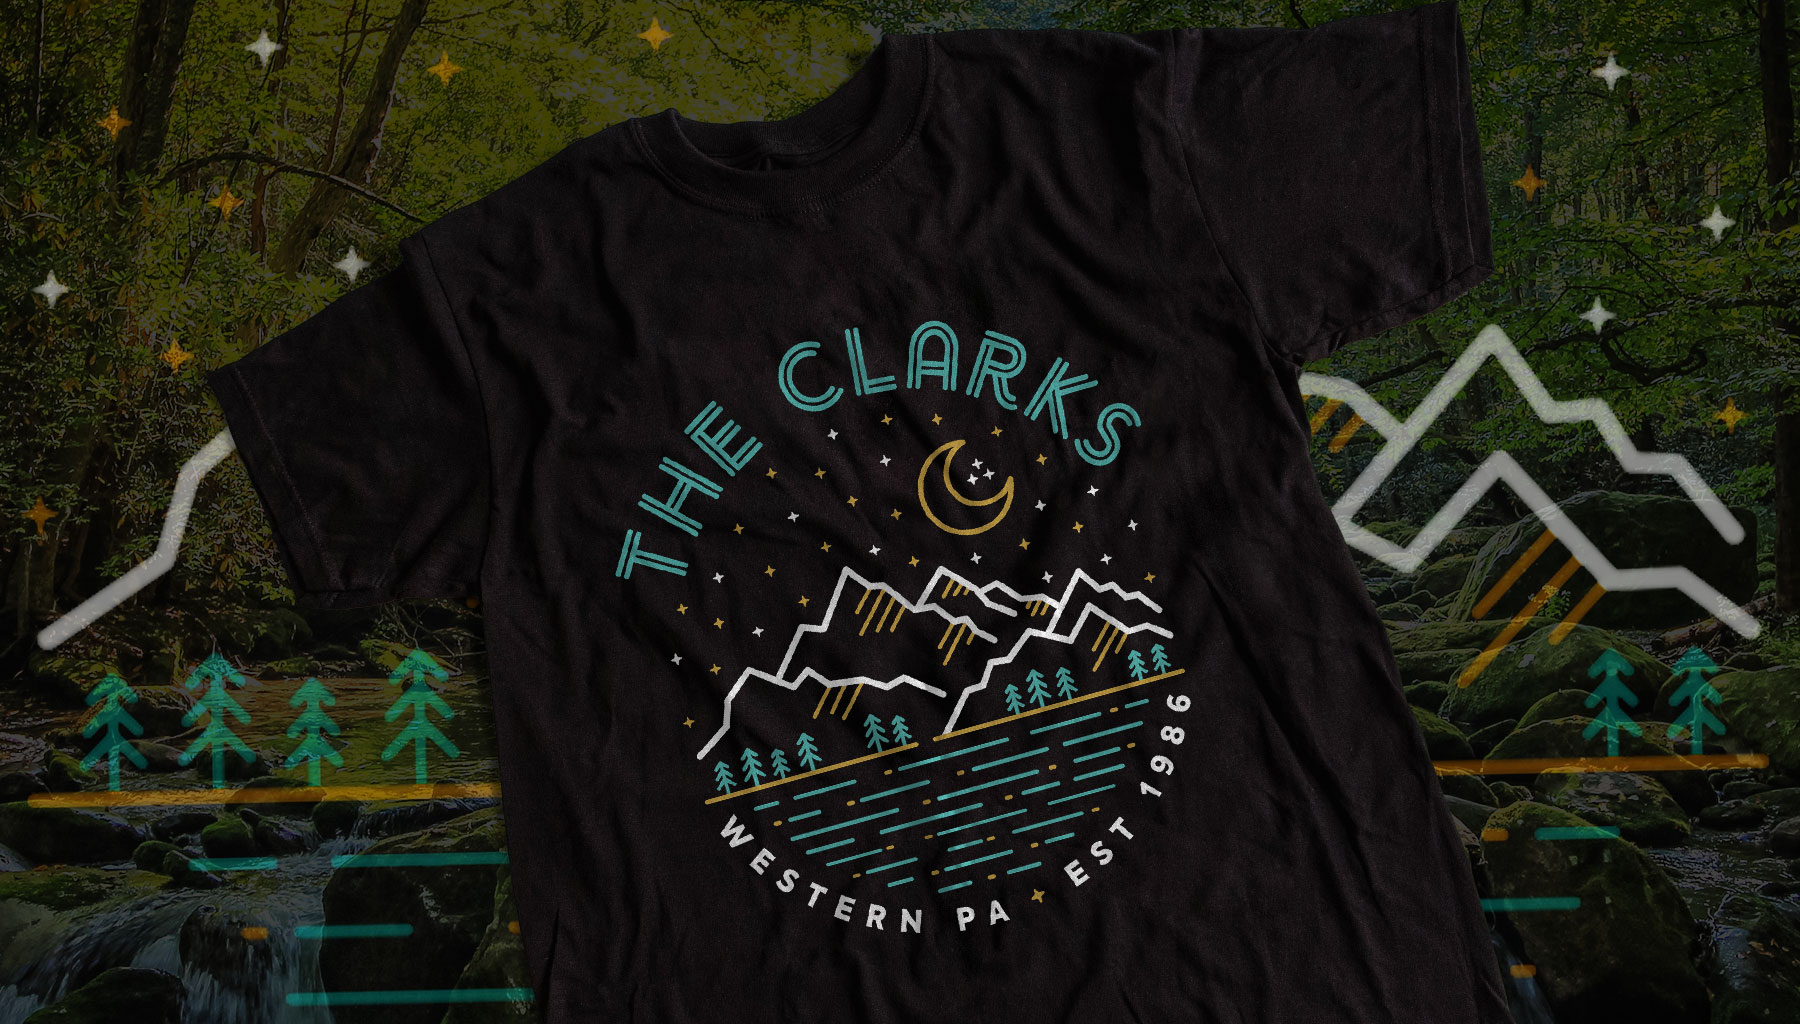 The Clarks Western PA Mountains Shirt